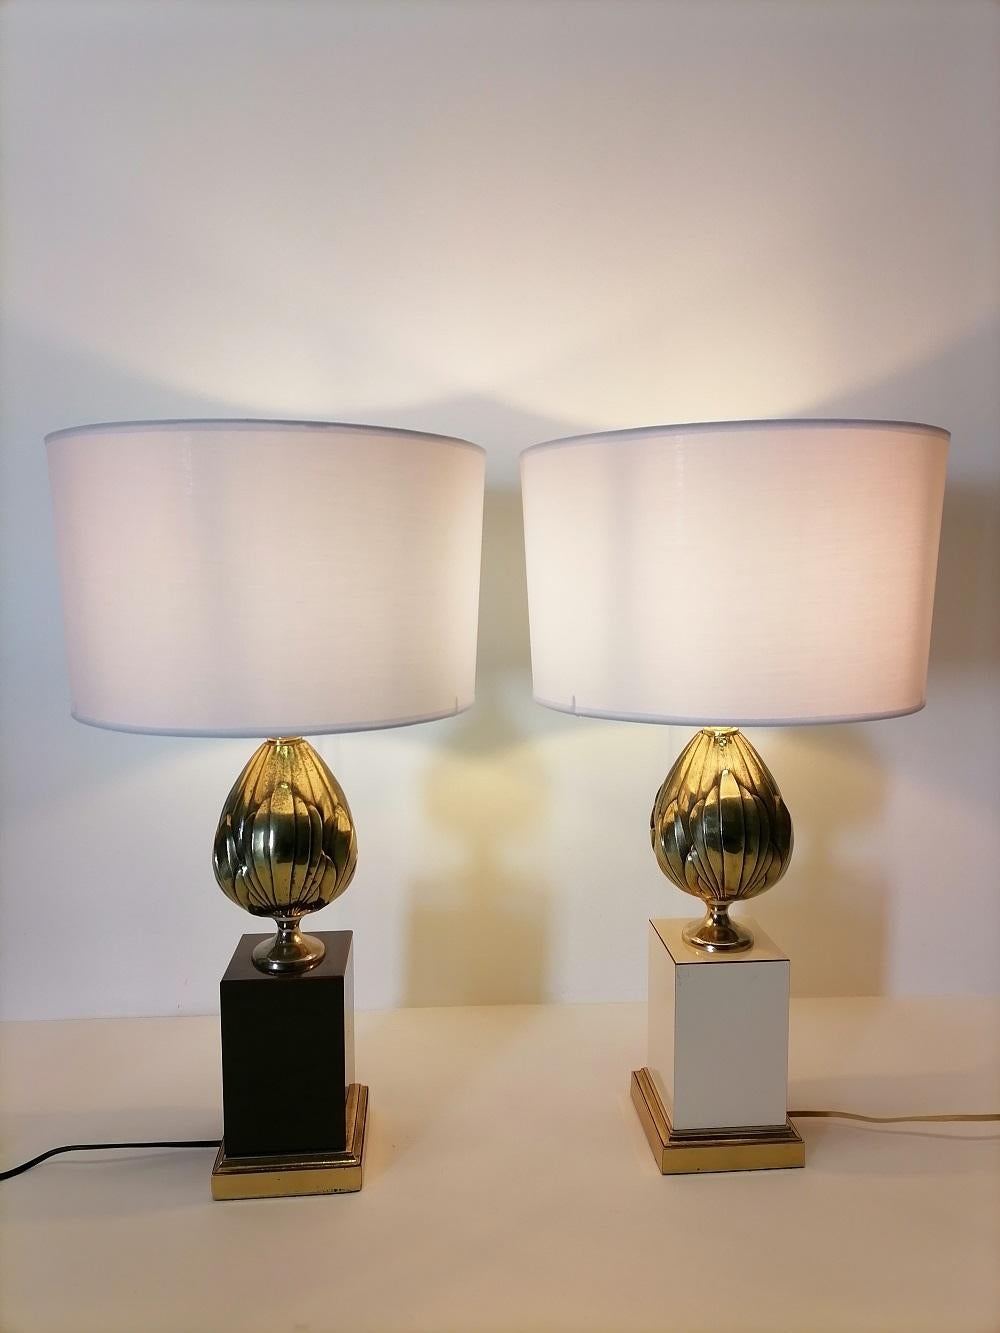 1970 French Midcentury Pair of Table Lamps in Maison Charles Style For Sale 1